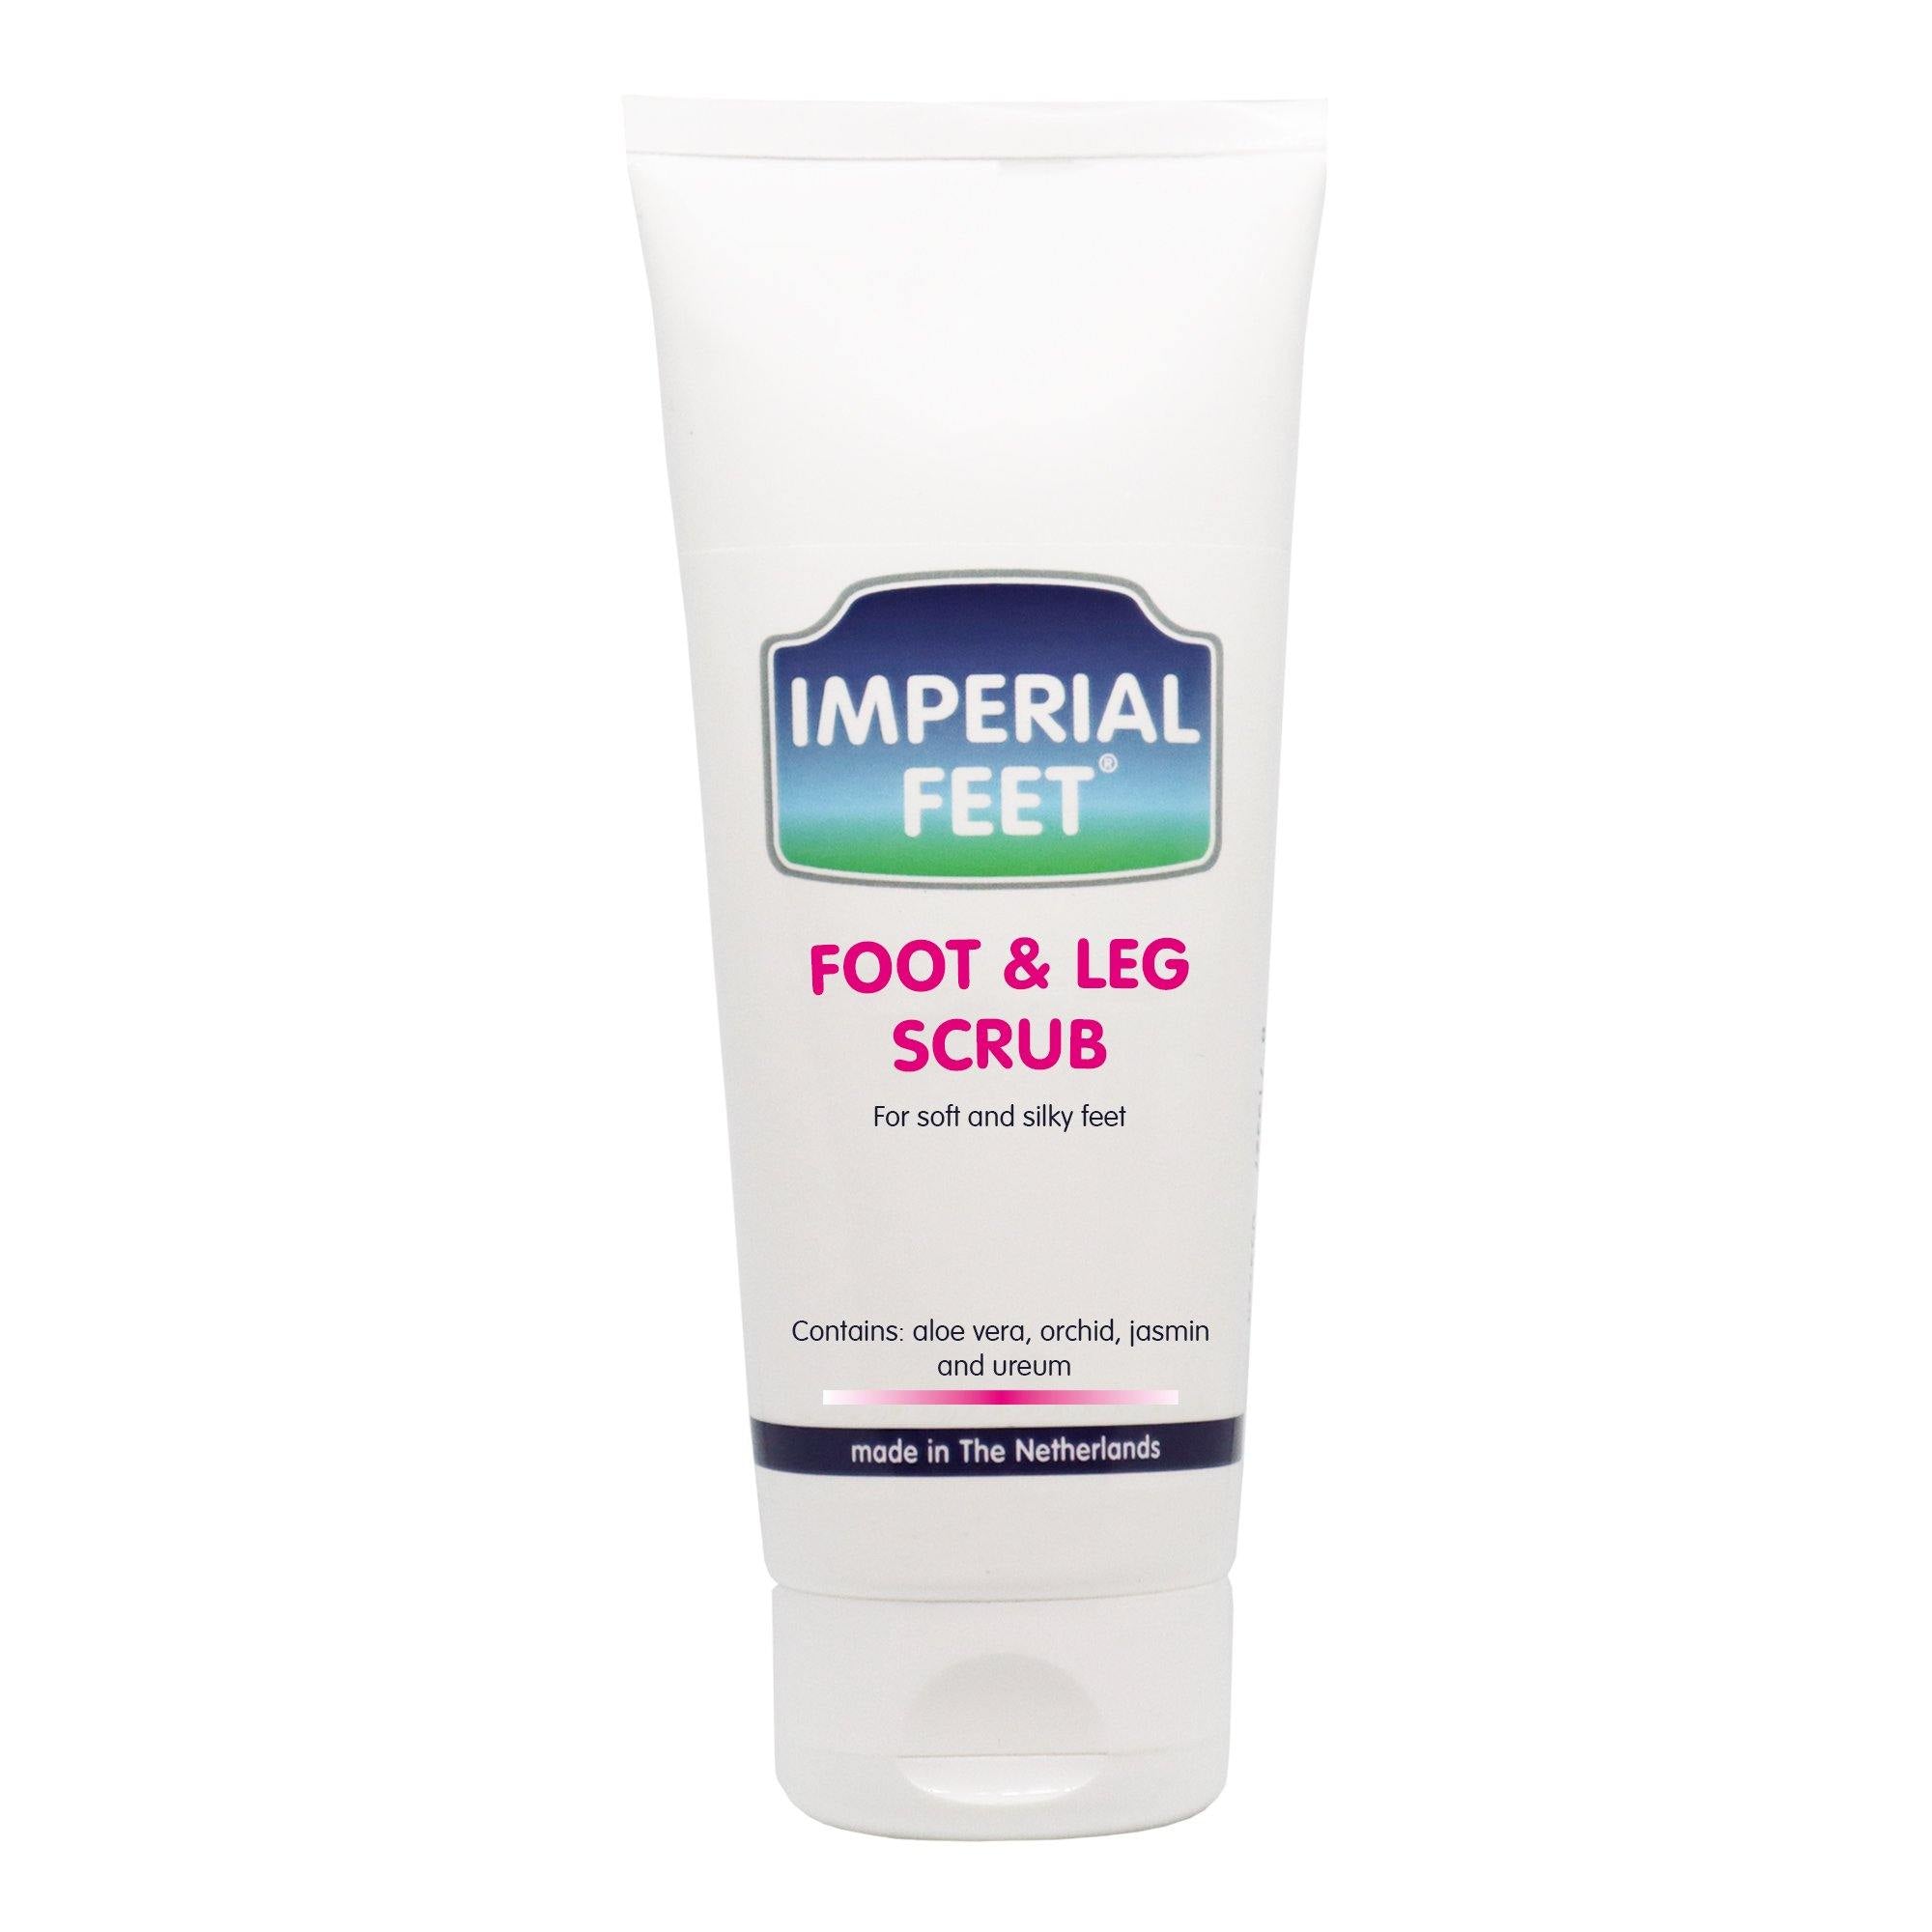 Foot and Leg Scrub - Imperial Feet - Foot care products - B2C, Extra Care